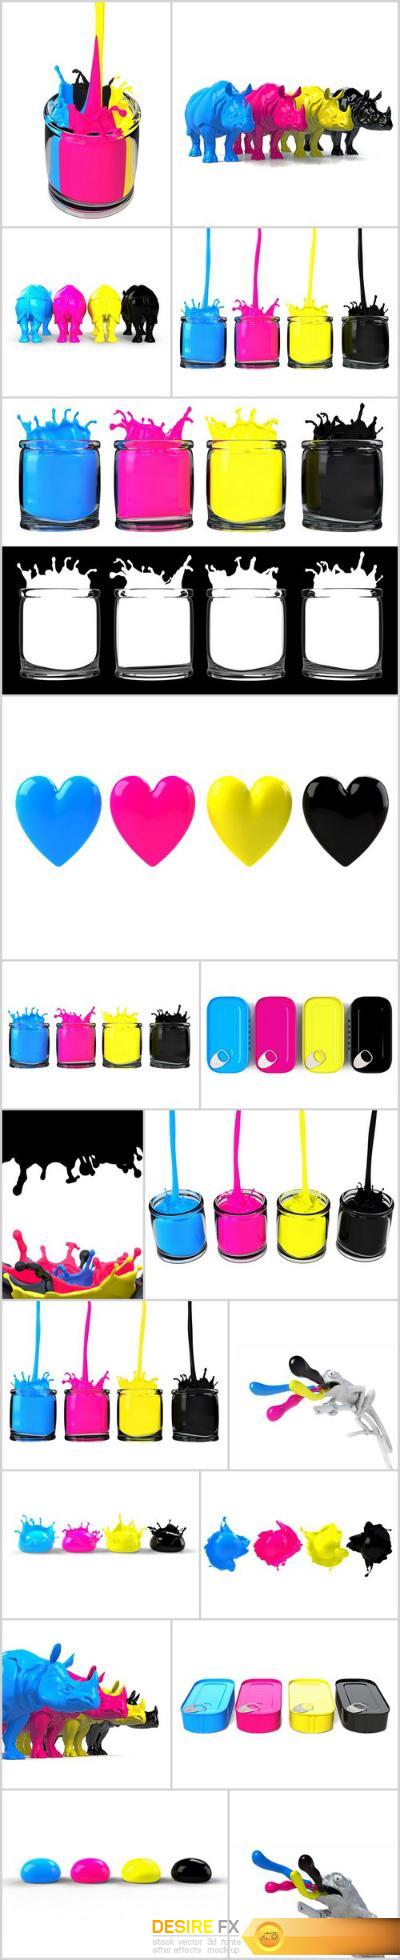 CMYK Paints, Style and Colors - 18xUHQ JPEG